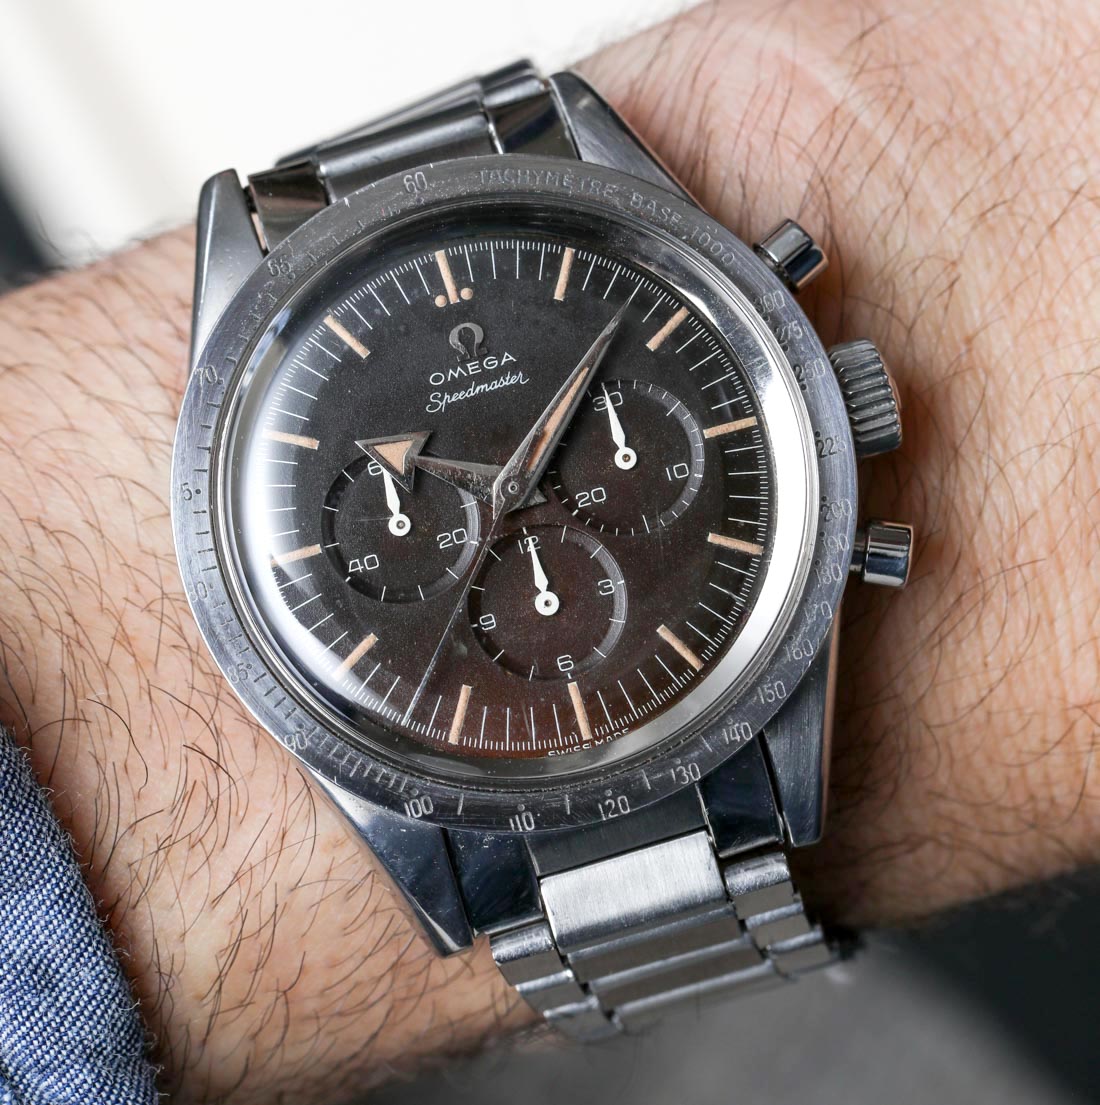 Historical Omega Speedmaster 38mm Review Replica Speedmaster Apollo & Alaska Special Mission Watches Hands-On Hands-On 